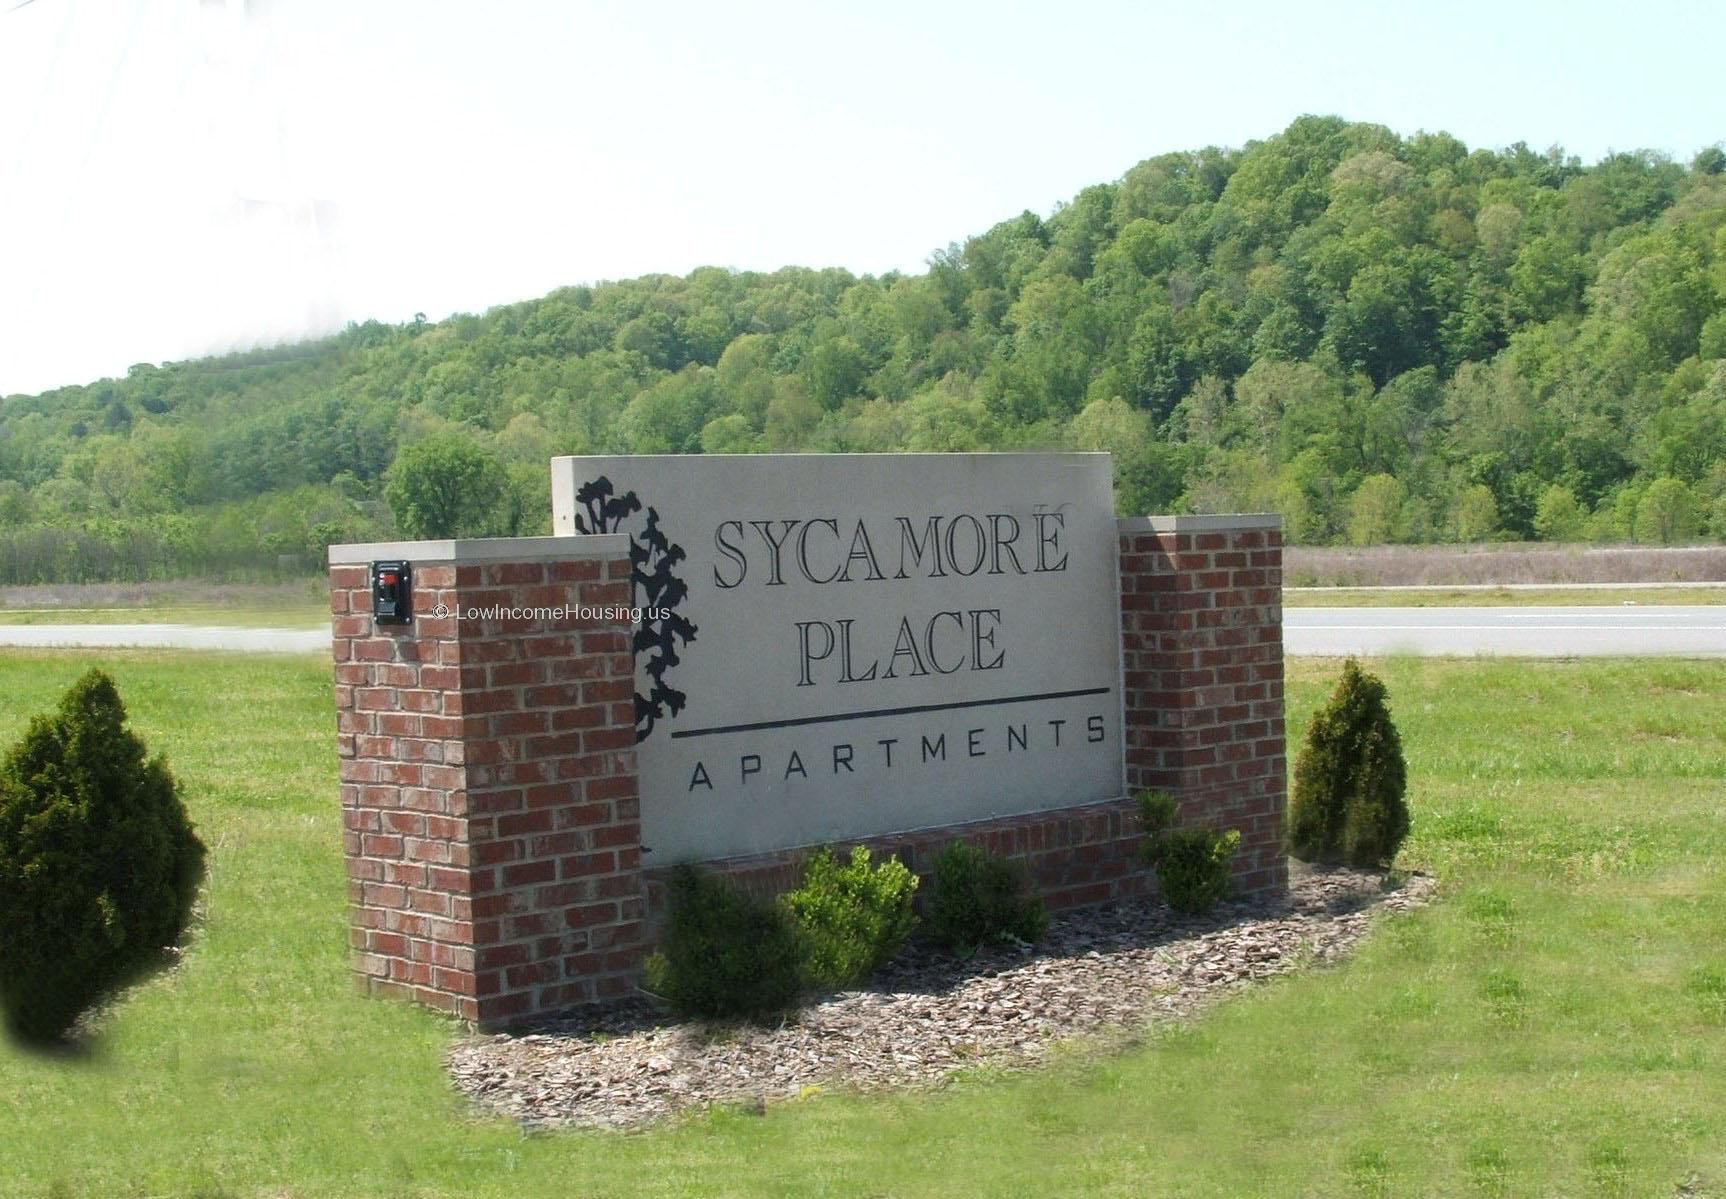 SYCAMORE PLACE
   APARTMENTS